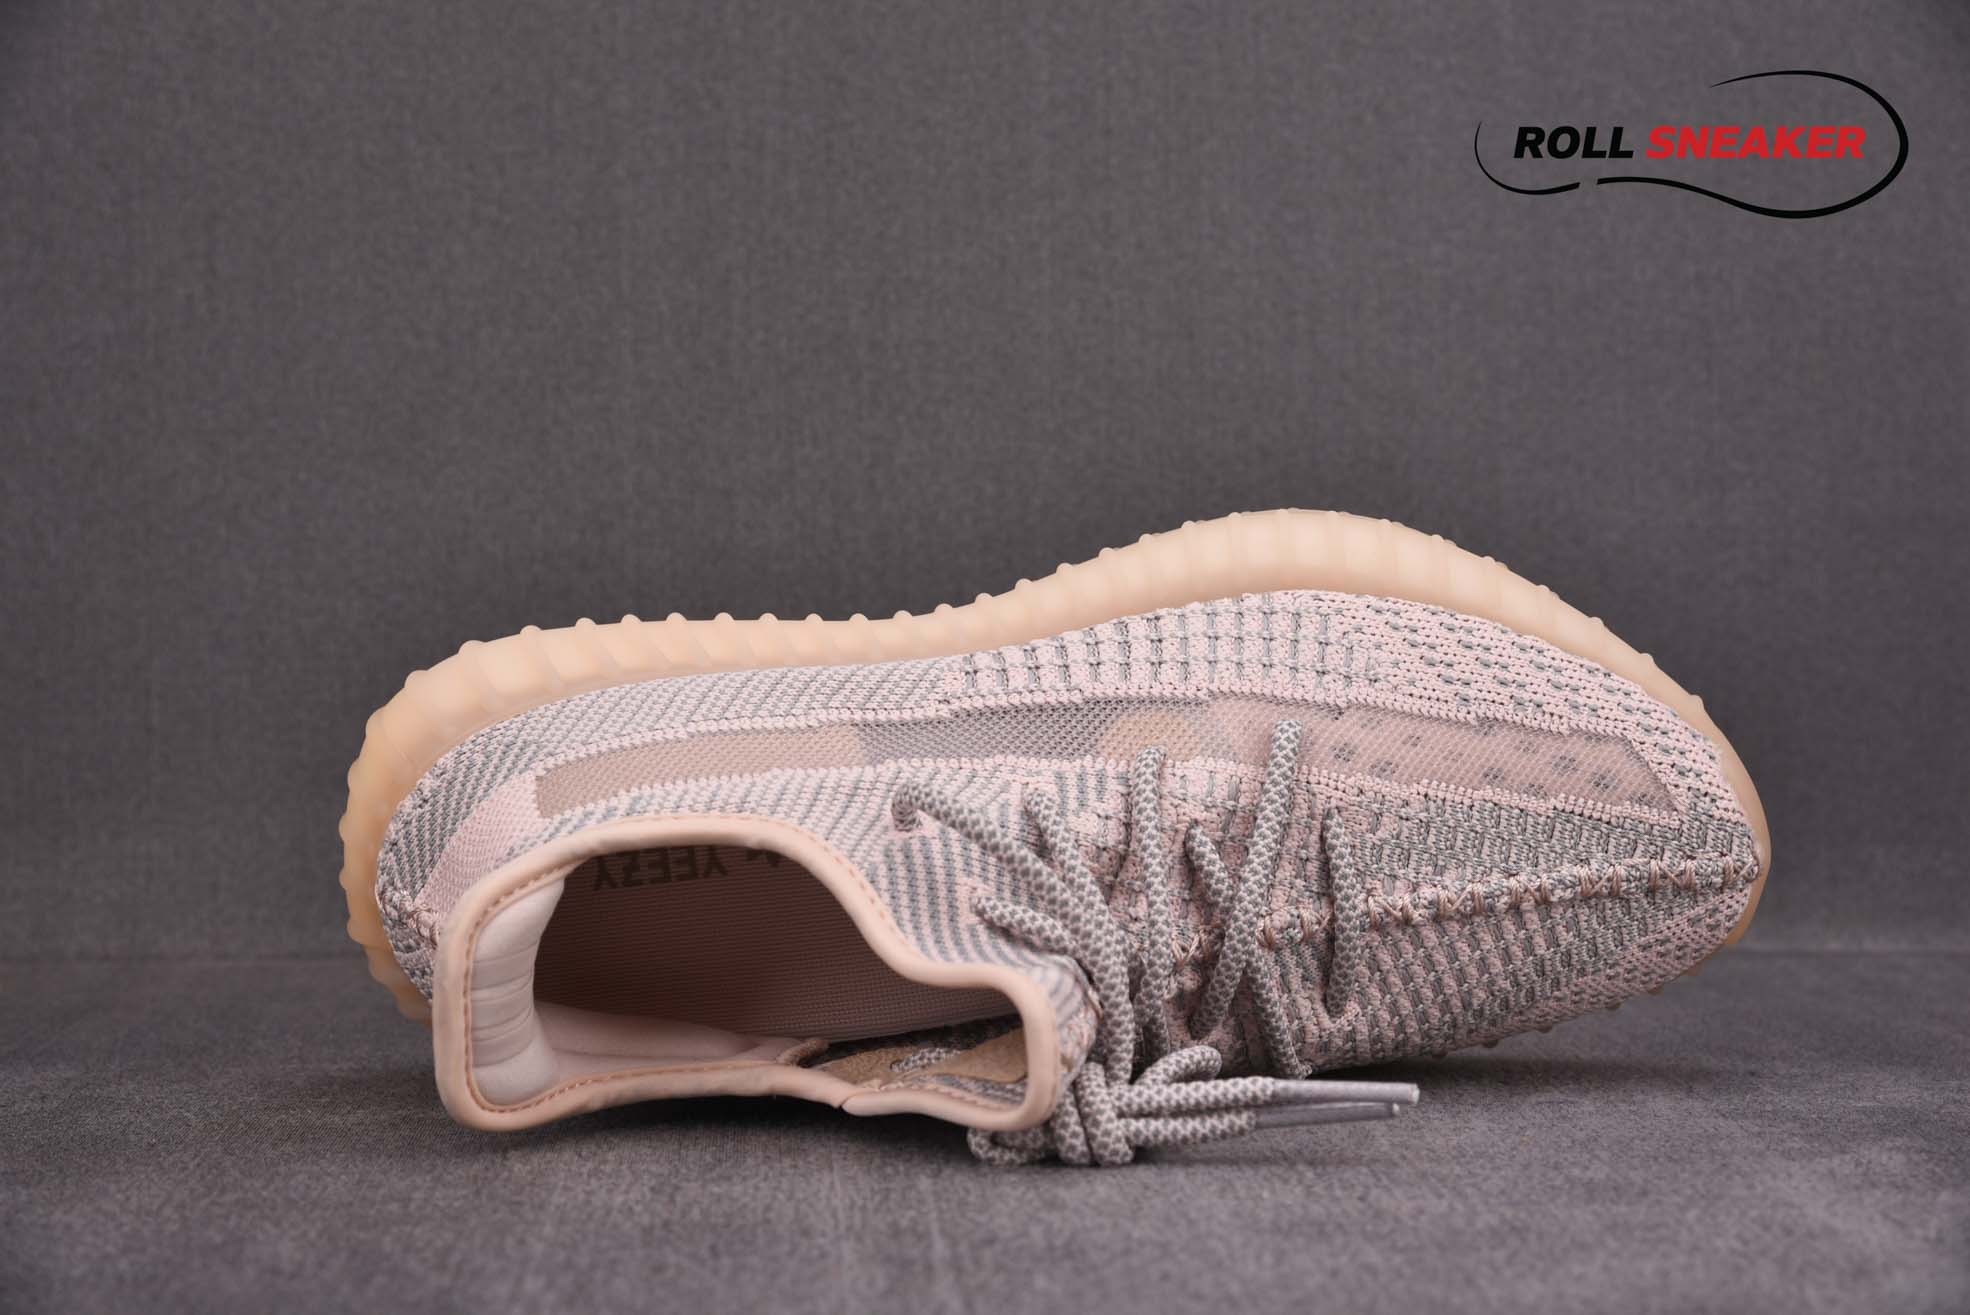 Adidas Yeezy Boost 350 V2 ‘Synth Non-Reflective’
